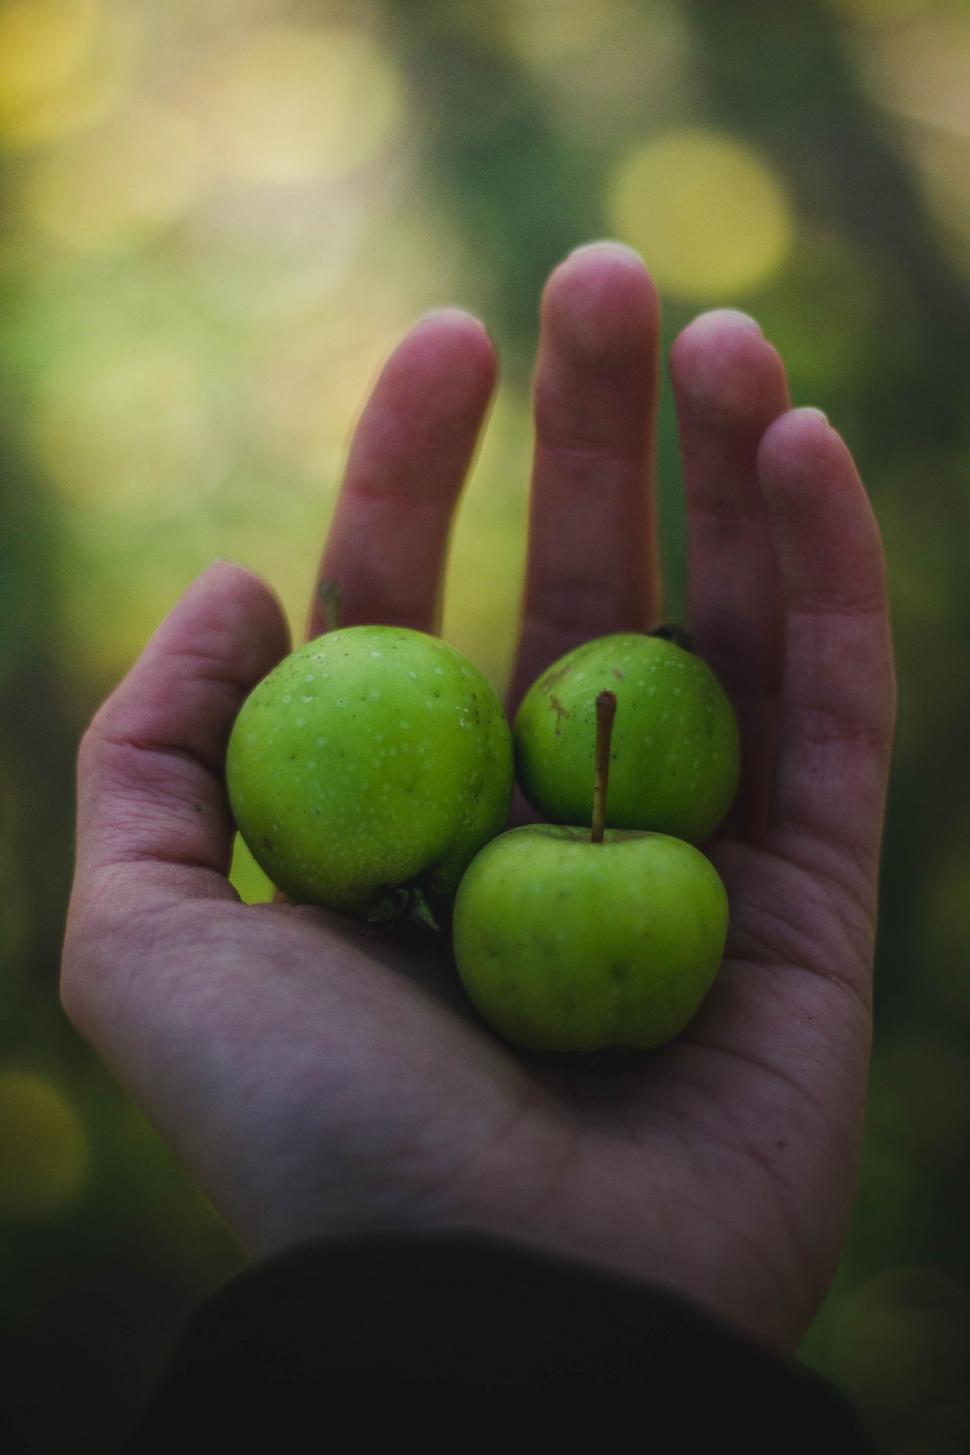 Free Image of Three Green Apples in the Palm 